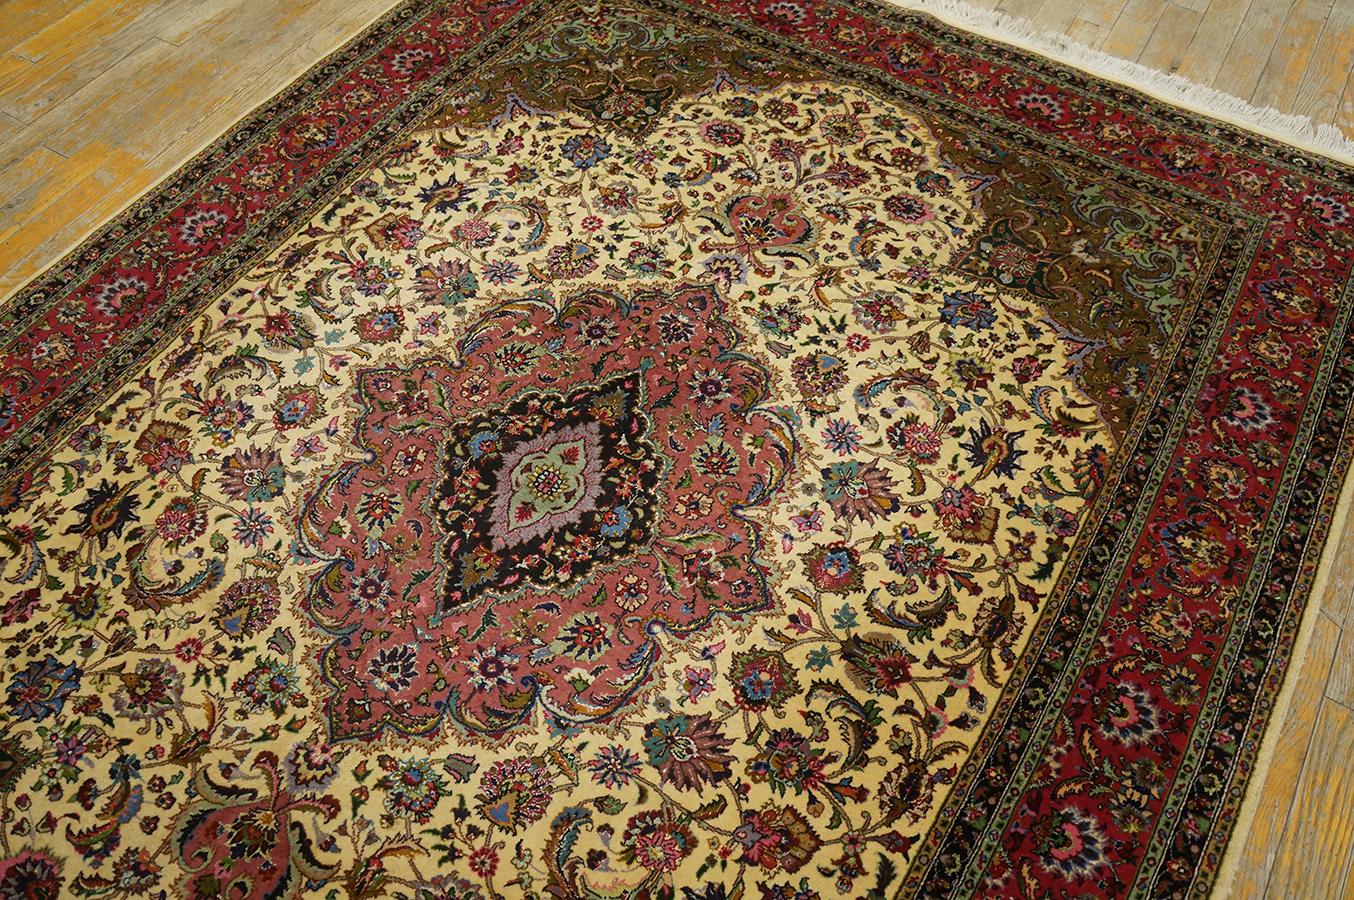 Hand-Knotted Antique Persian Tabriz Rug 4'10